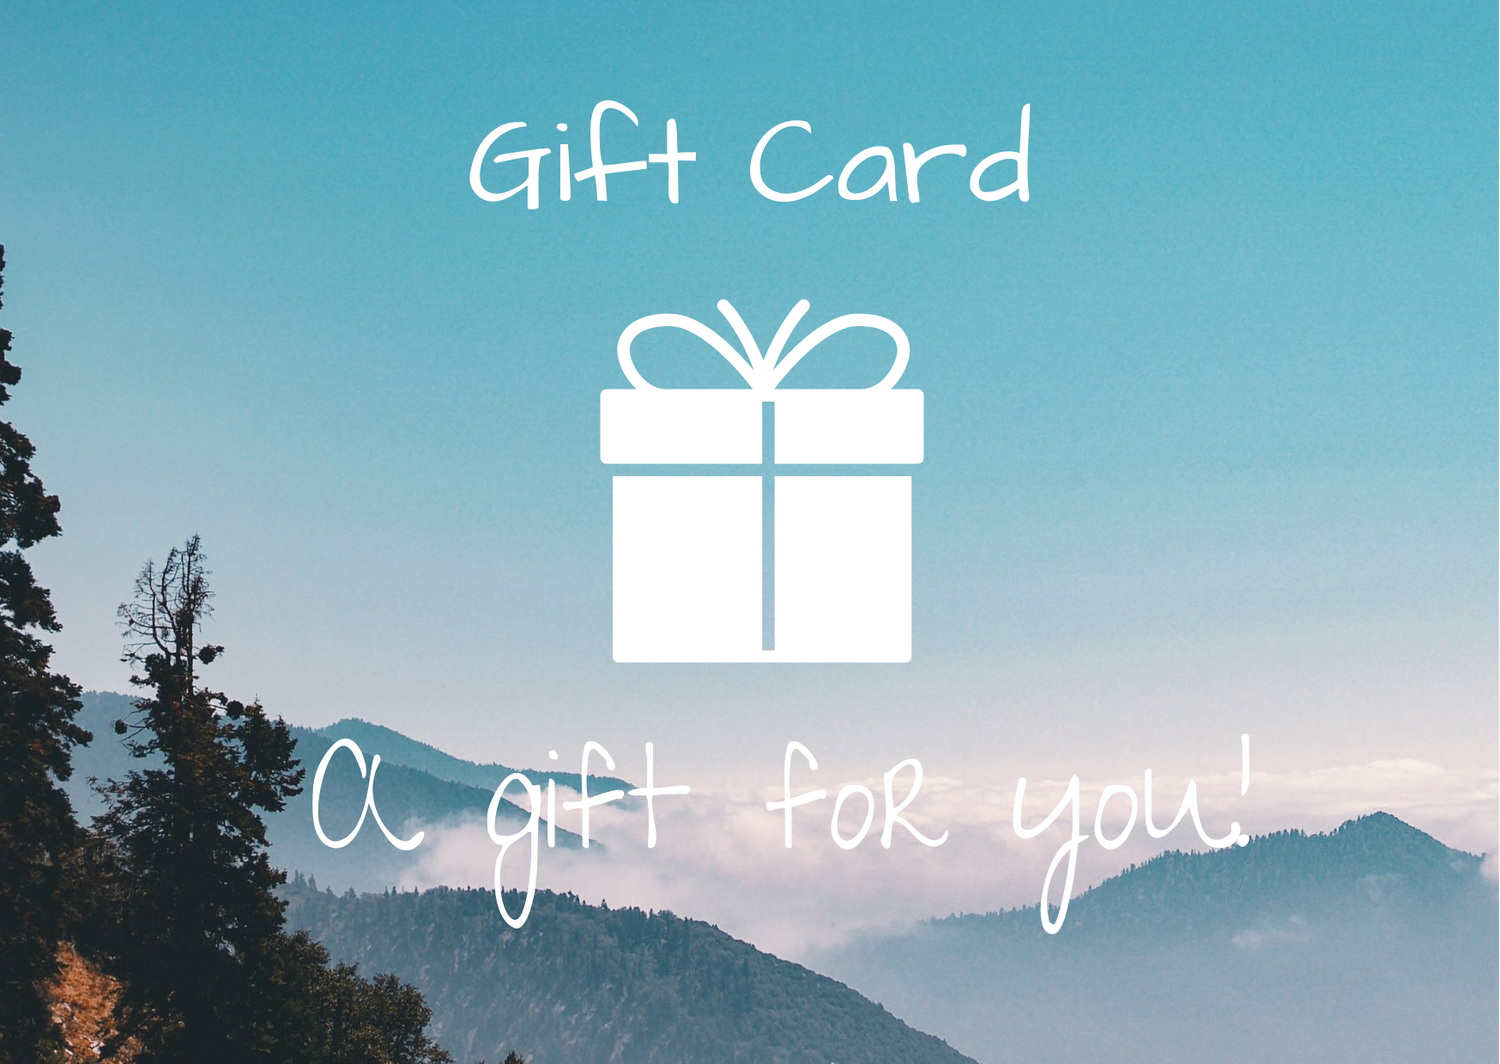 Gifft Card now Available! 